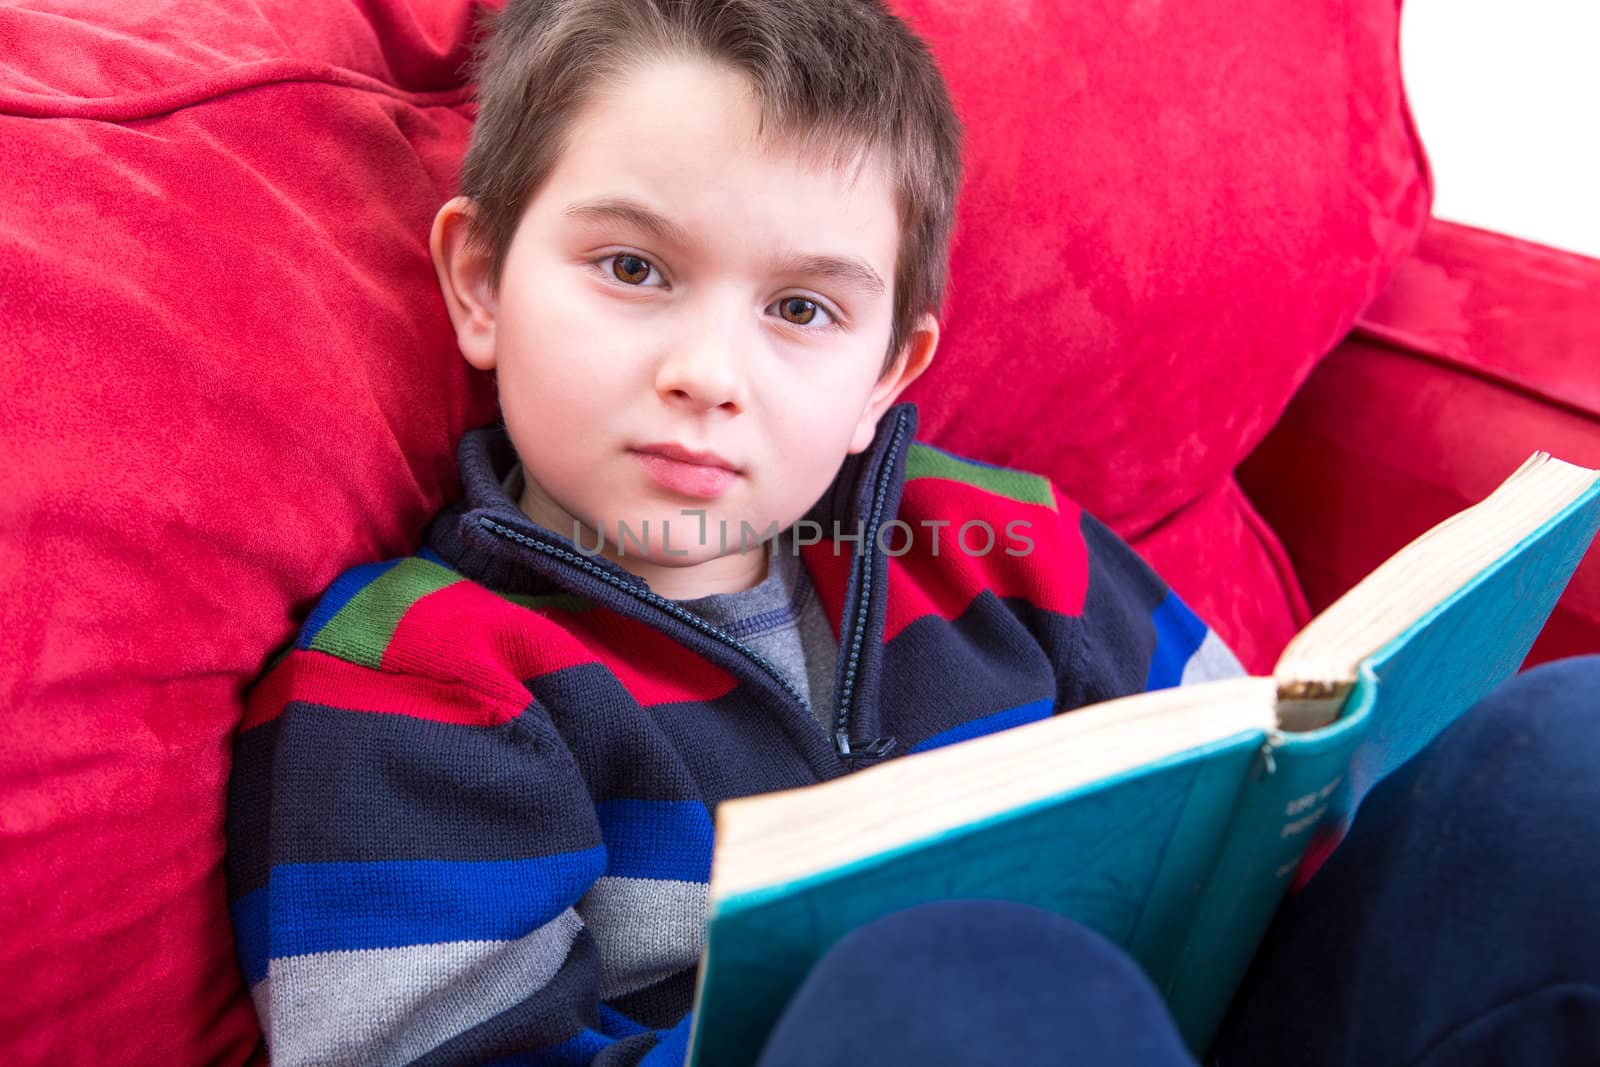 Kid Reading Book on the Couch by coskun